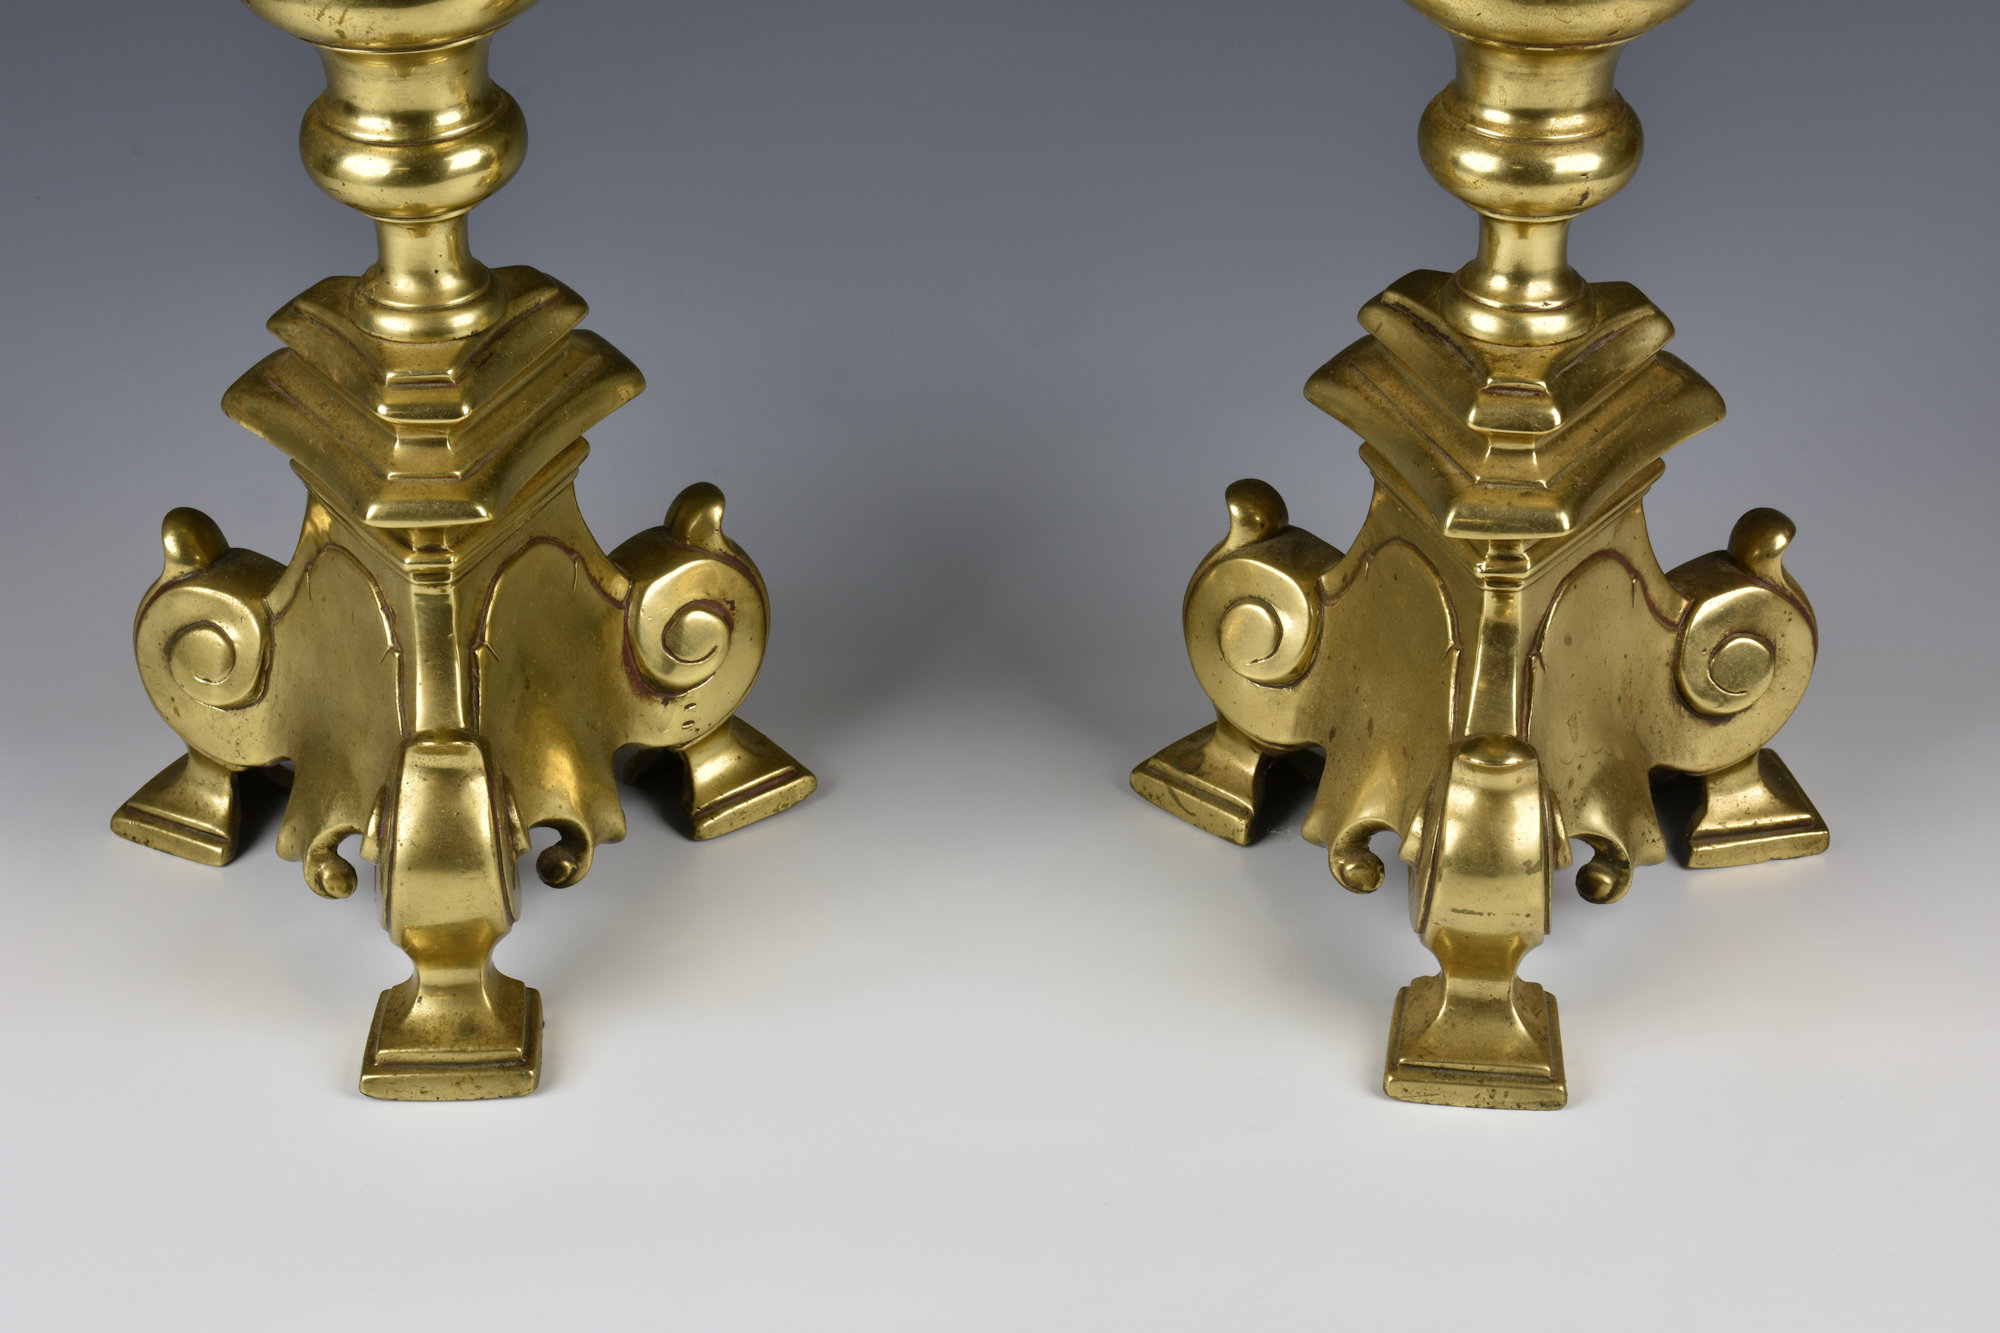 A pair of 17th / 18th century Flemish brass pricket candlesticks each with a circular drip pan - Image 2 of 6